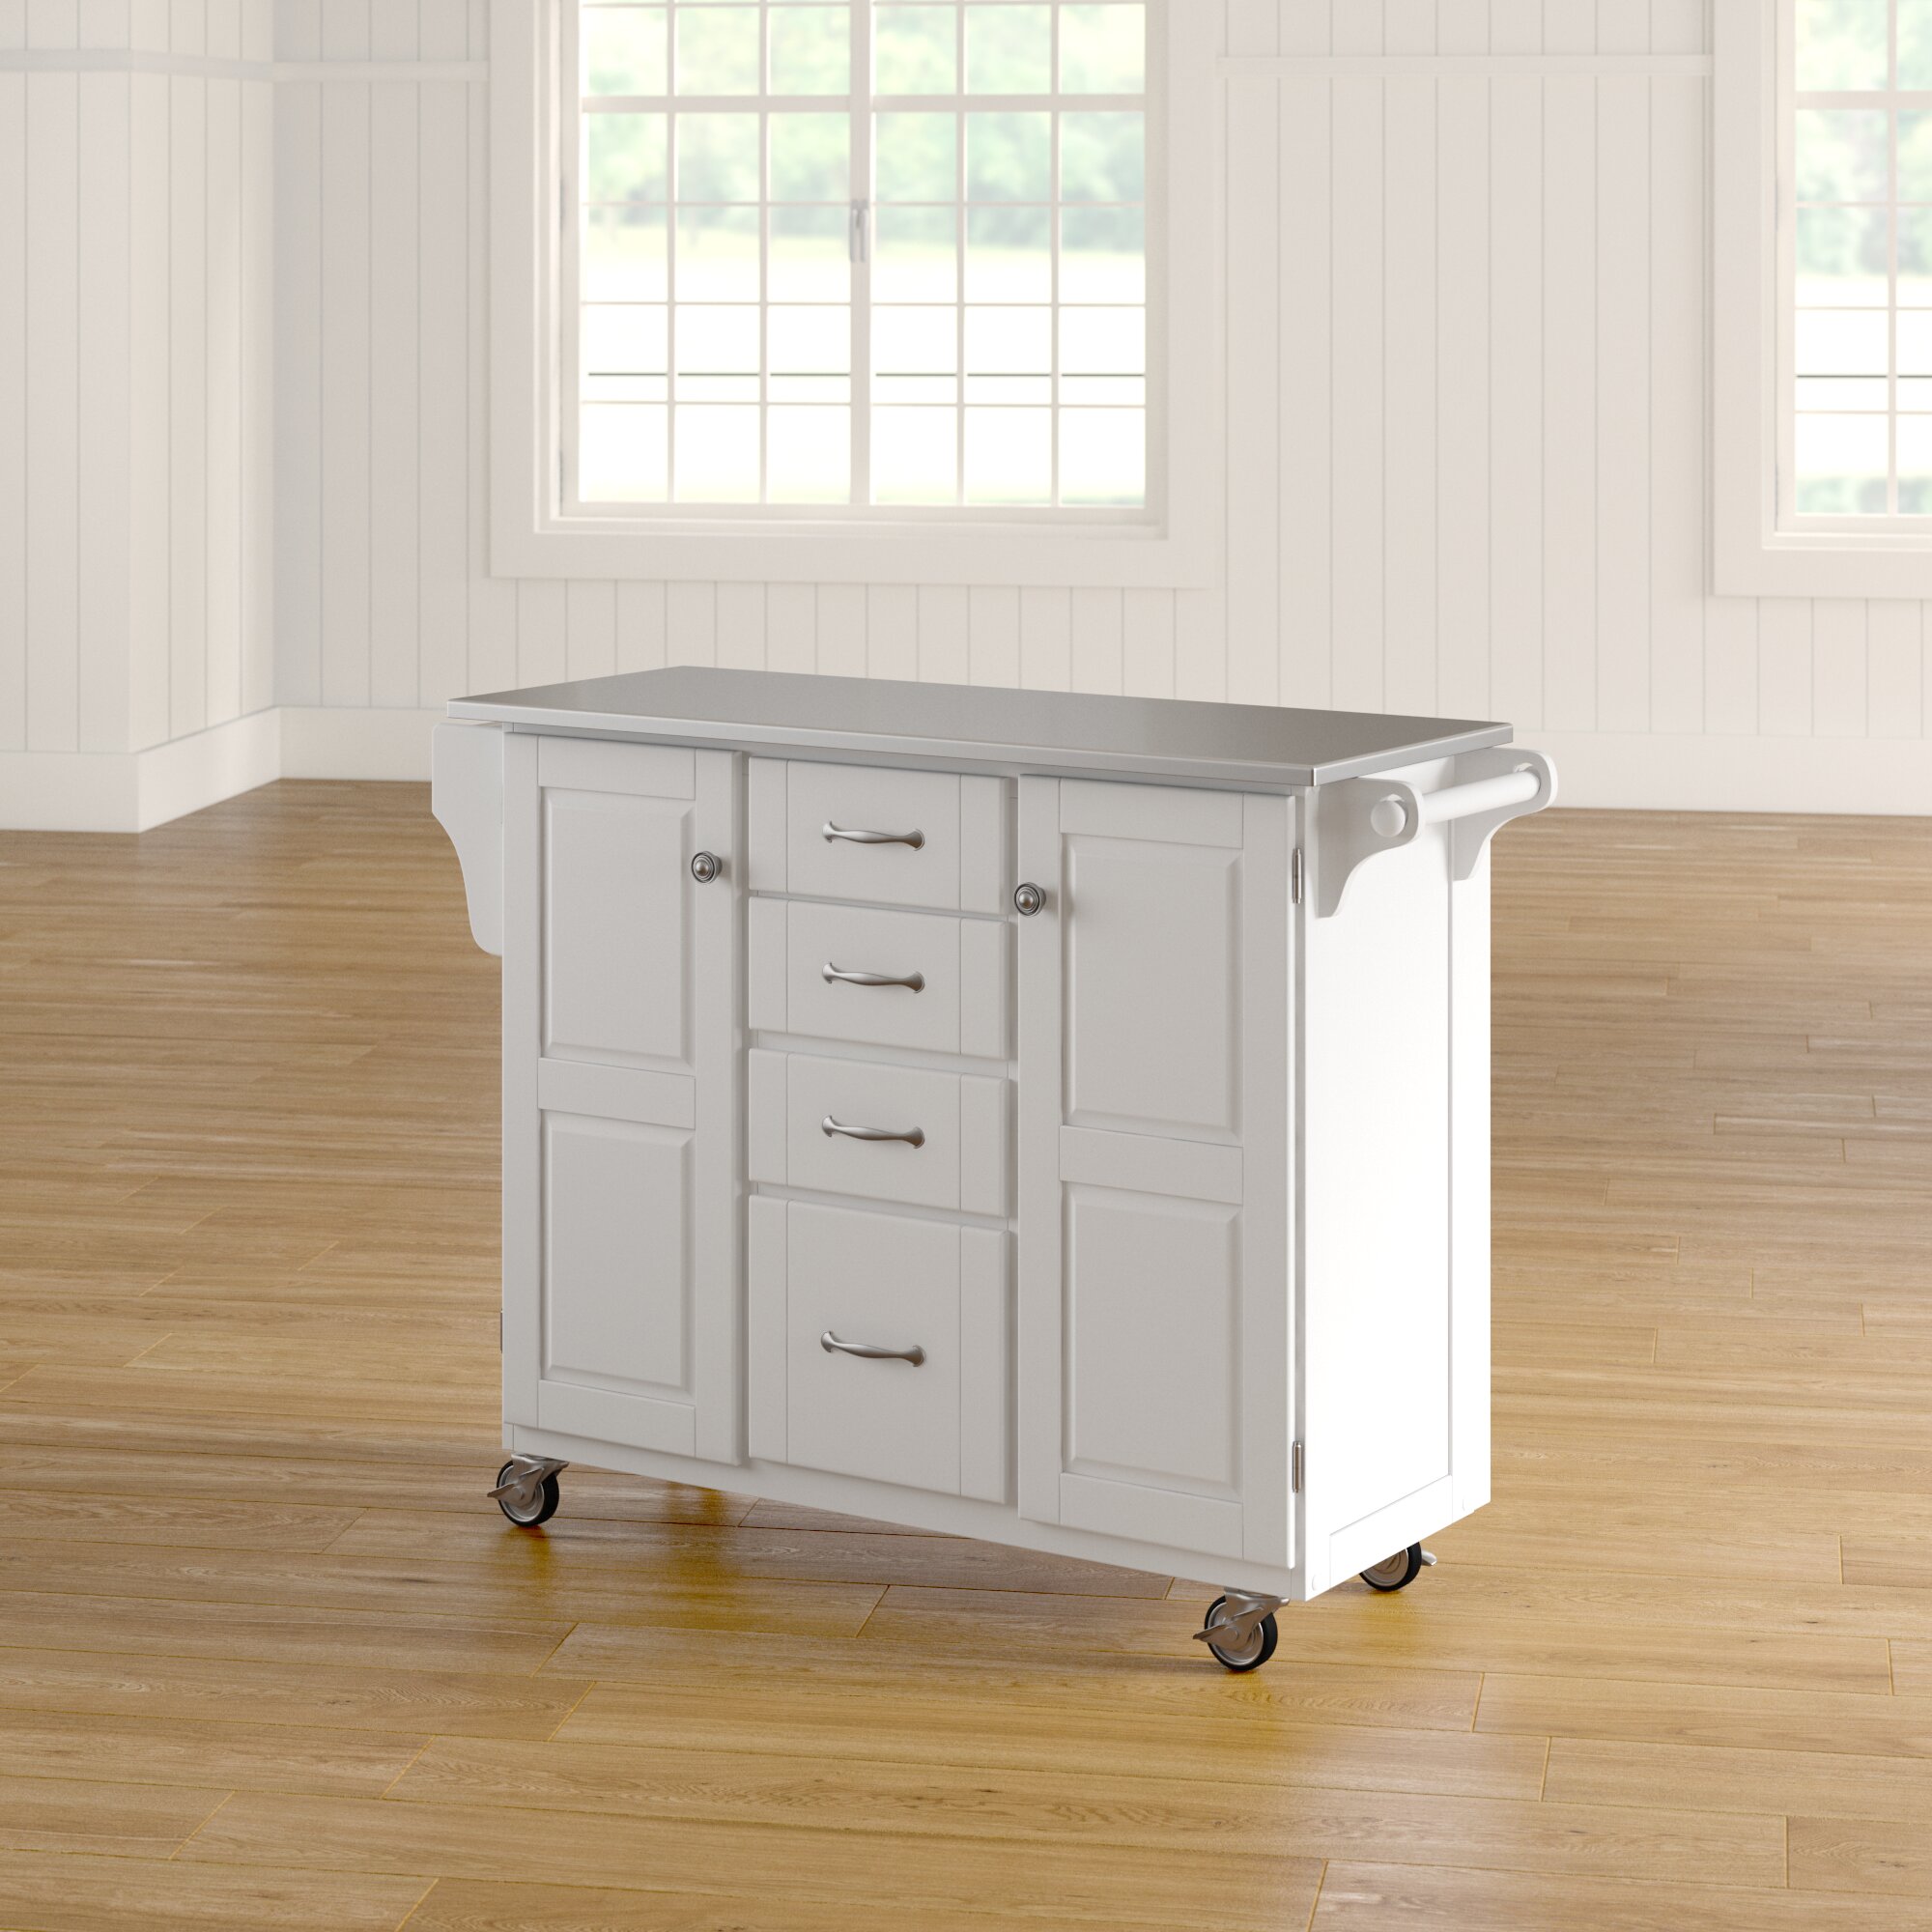 August Grove Adelle A Cart Kitchen Island With Stainless Steel Top Reviews Wayfair